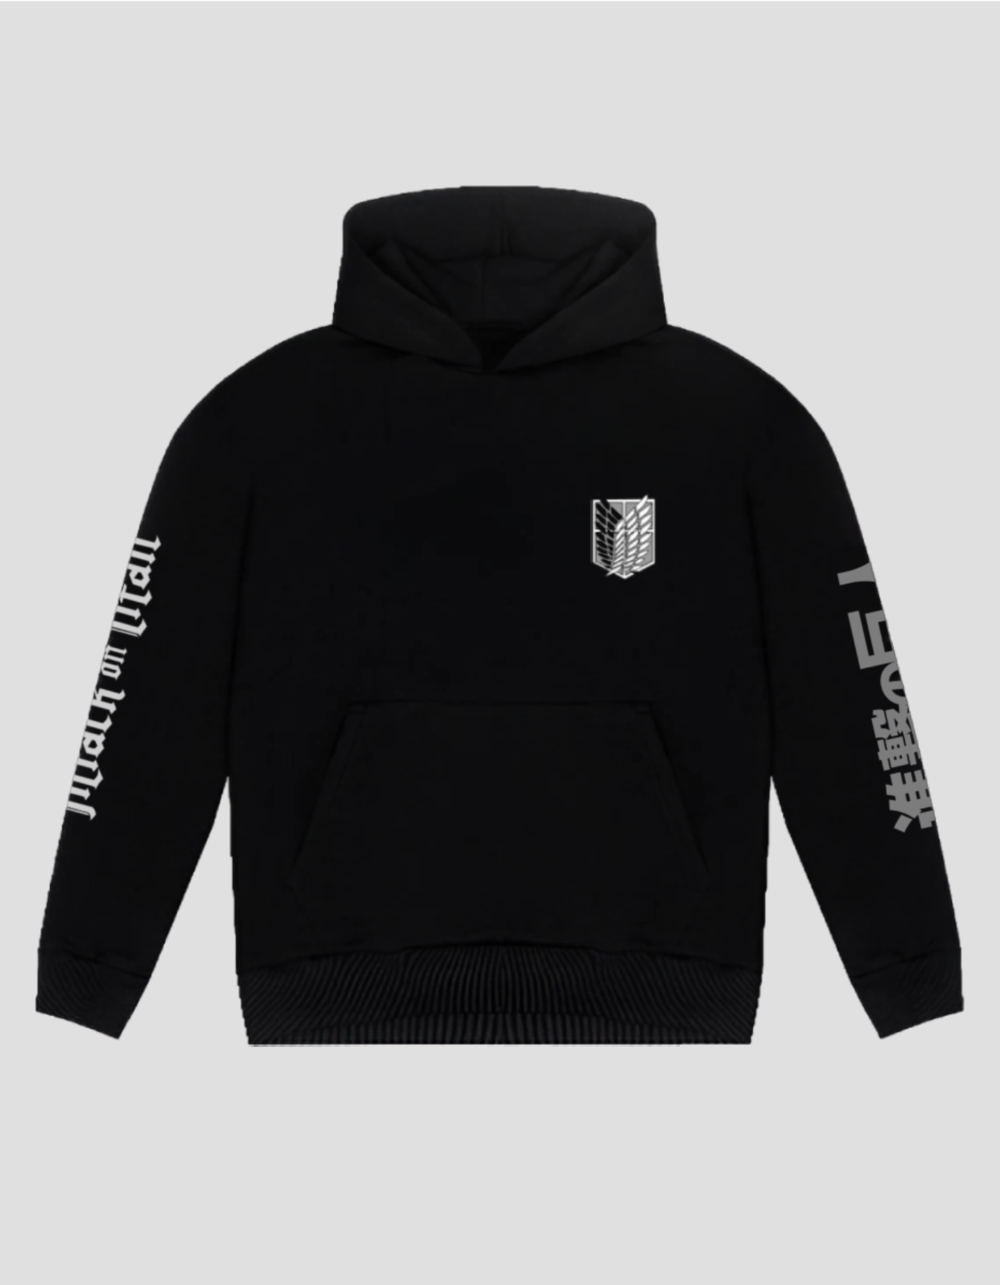 Attack on titan hoodie - front